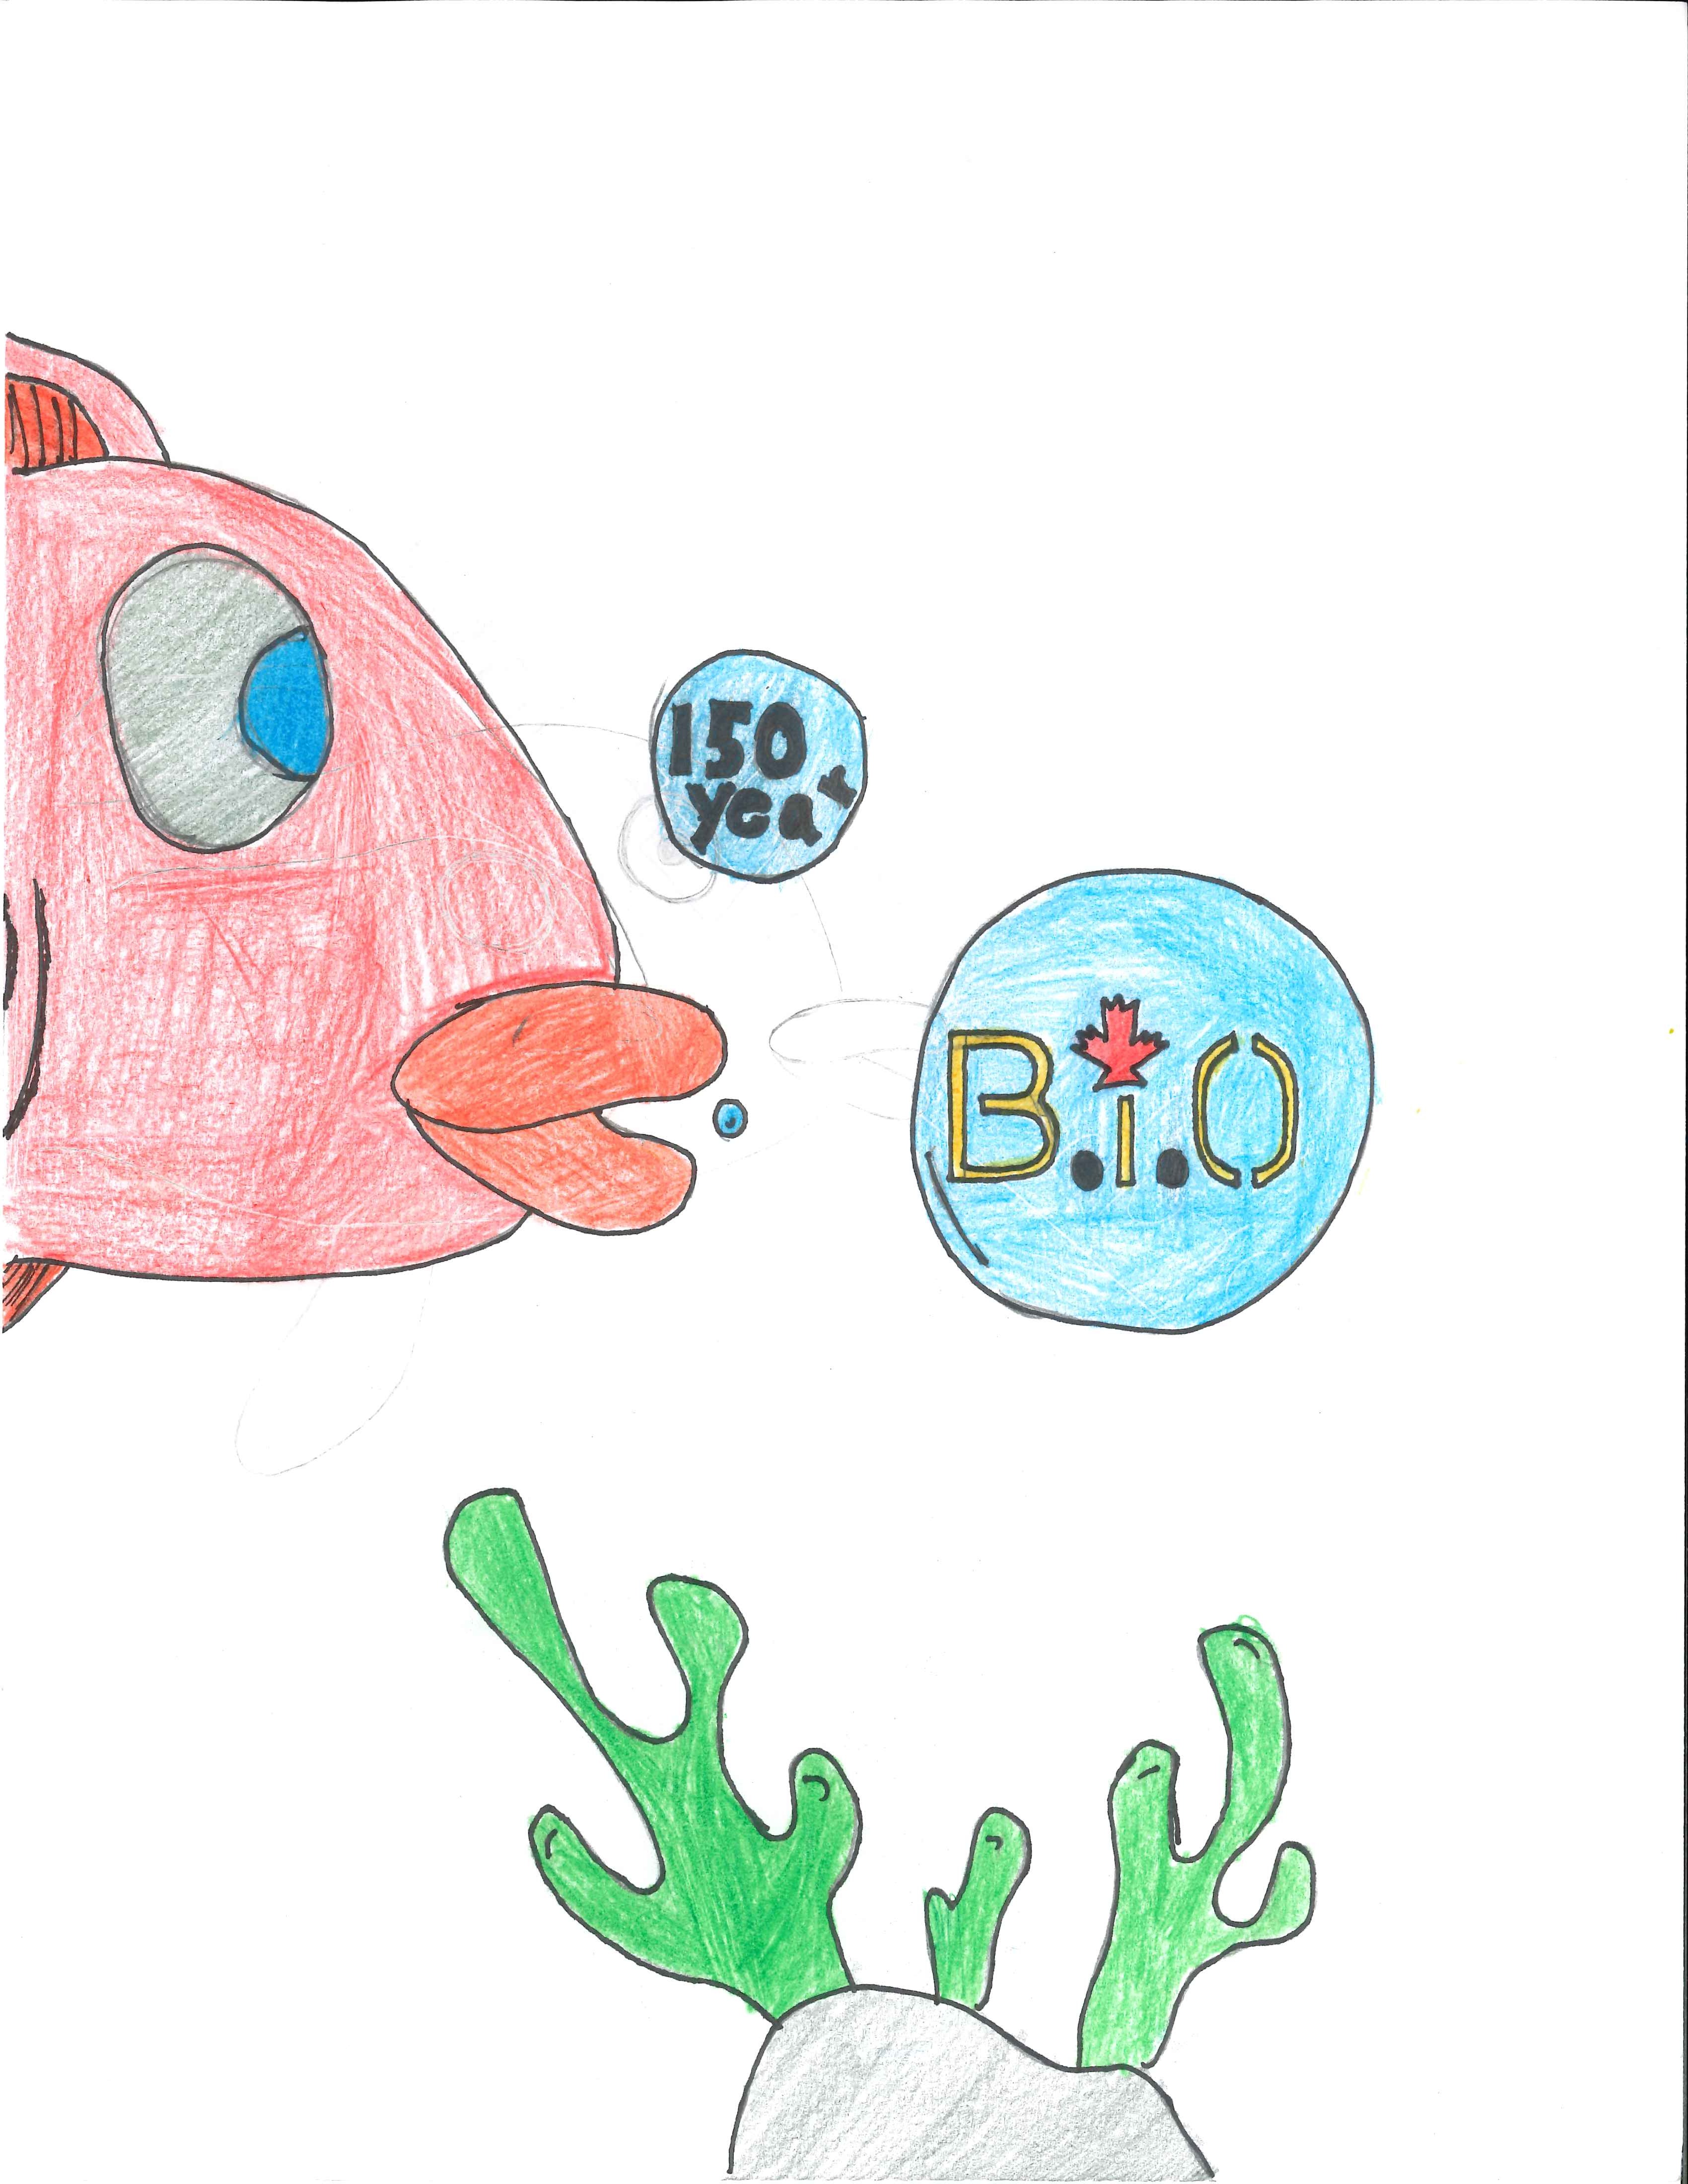 First Runner Up: Ibrahim K. Grade 6. "Fish with lips"